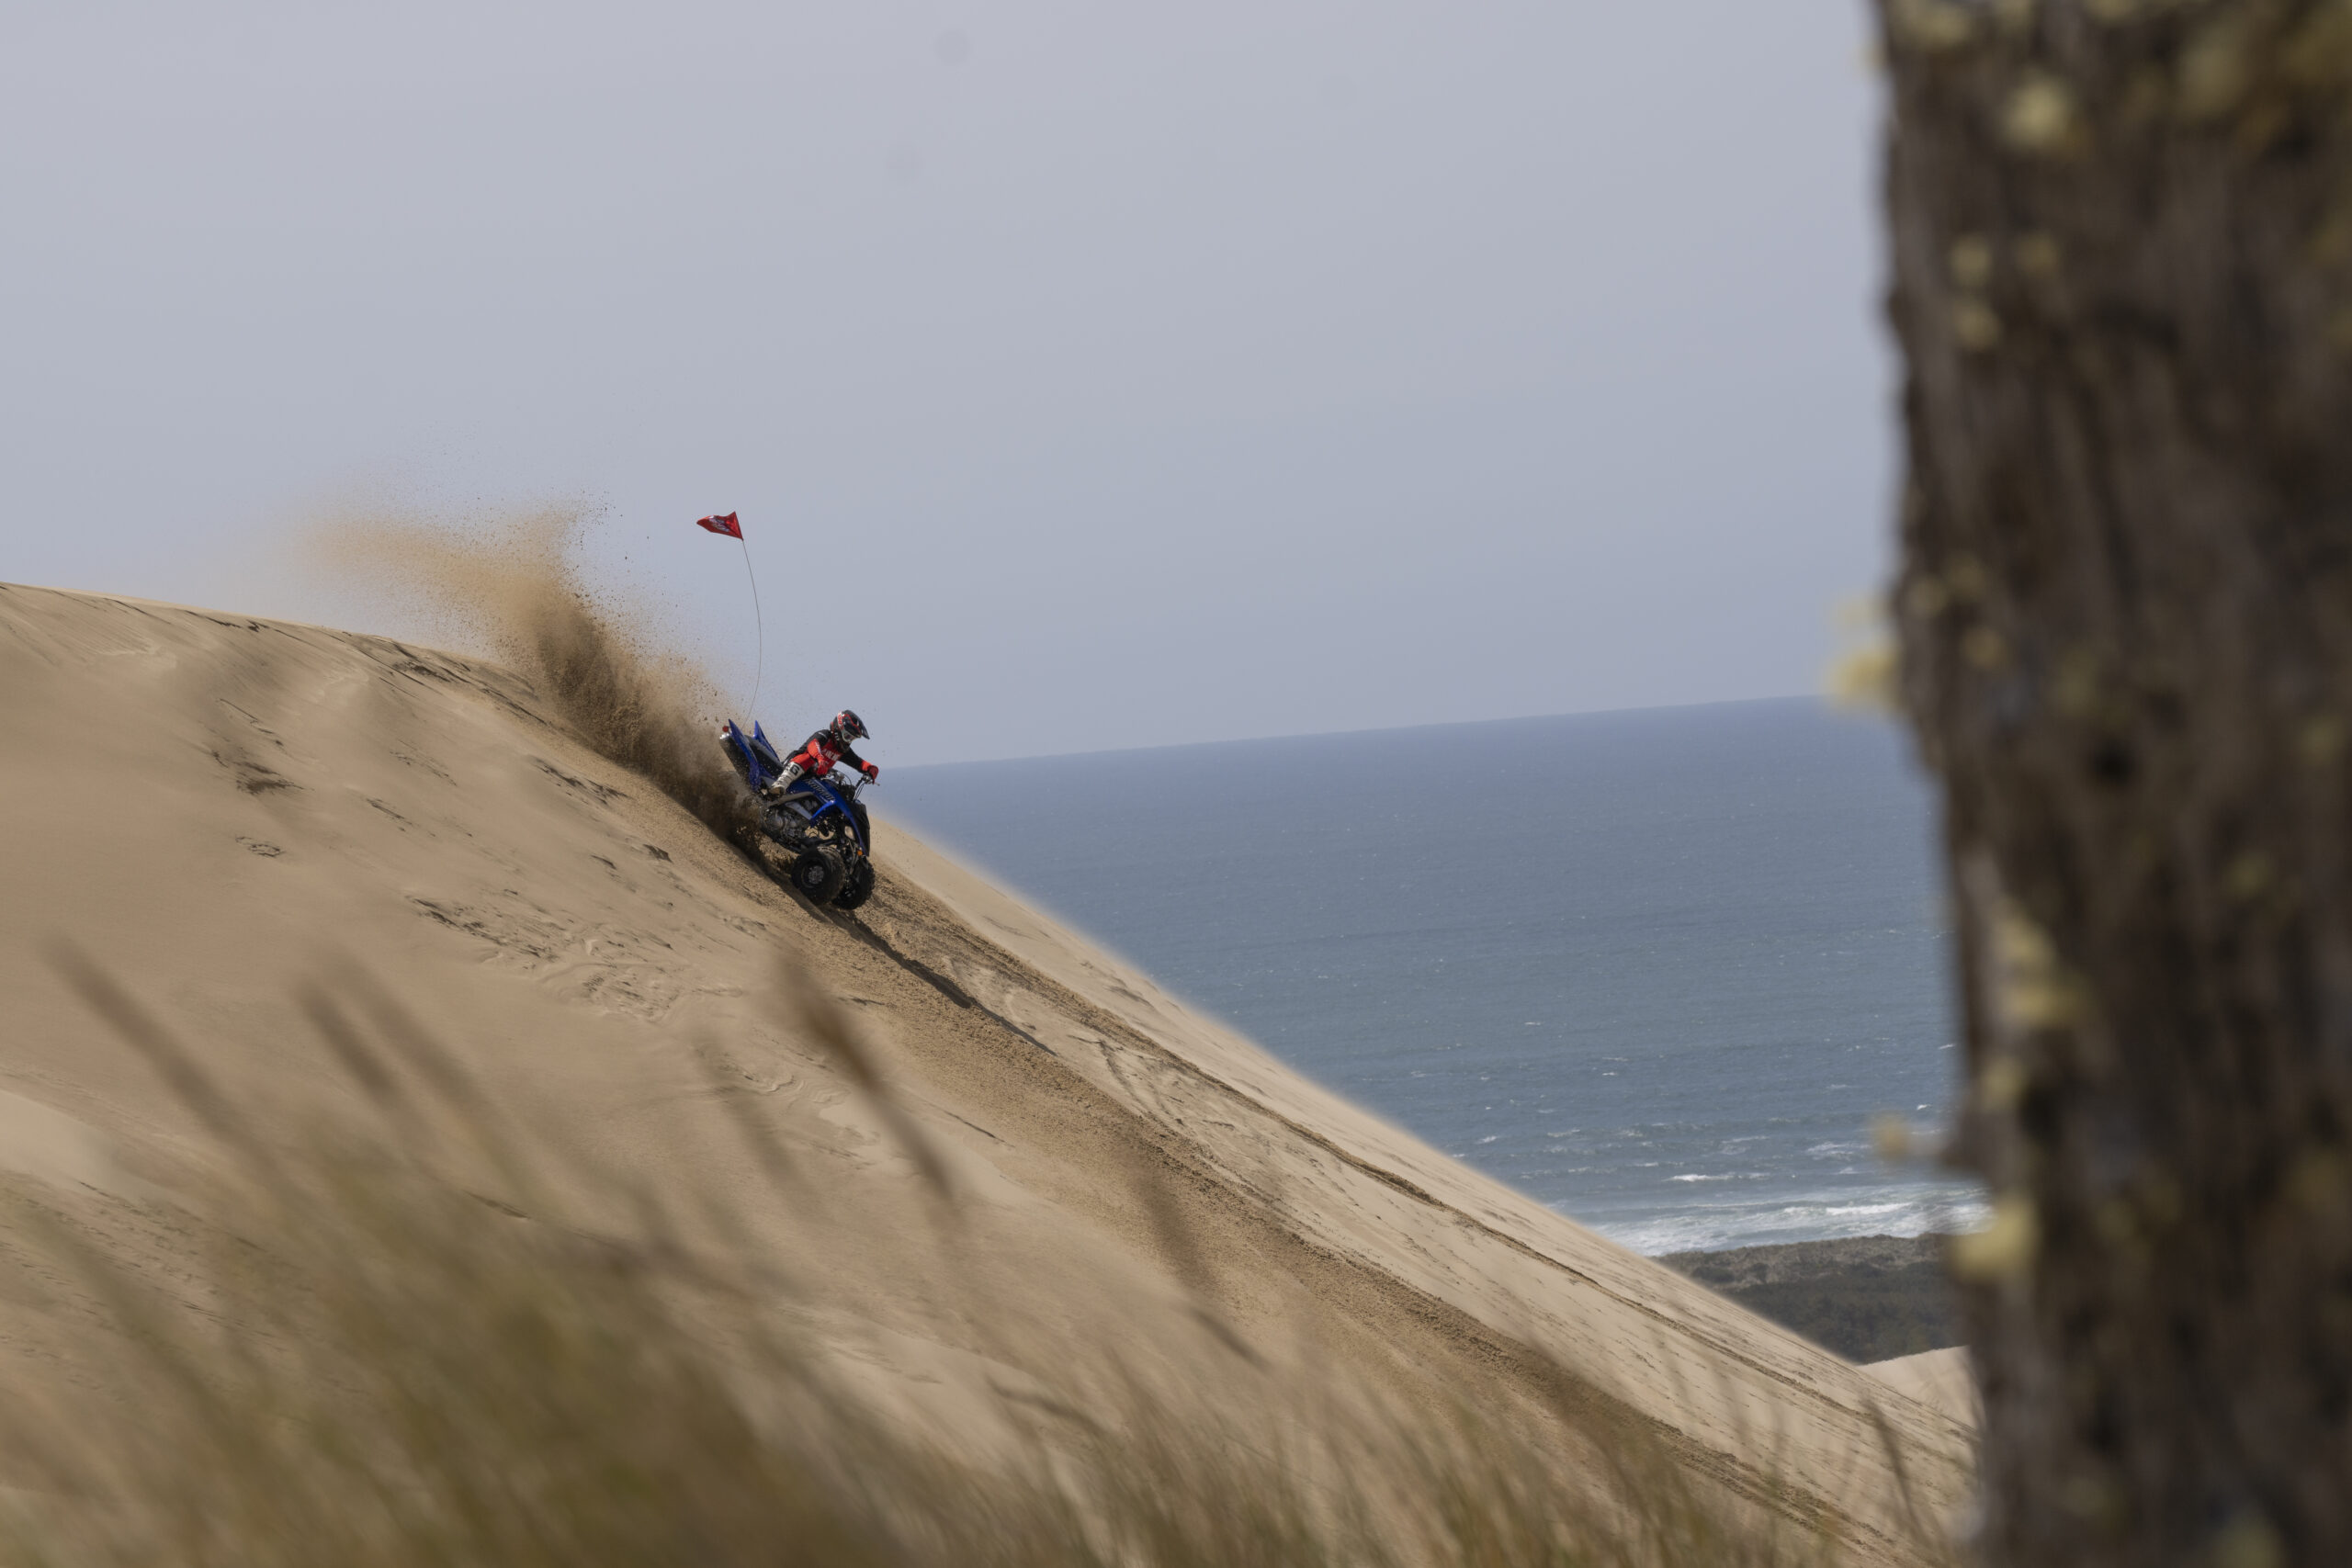 The ride experience at Oregon Dunes was like none other.